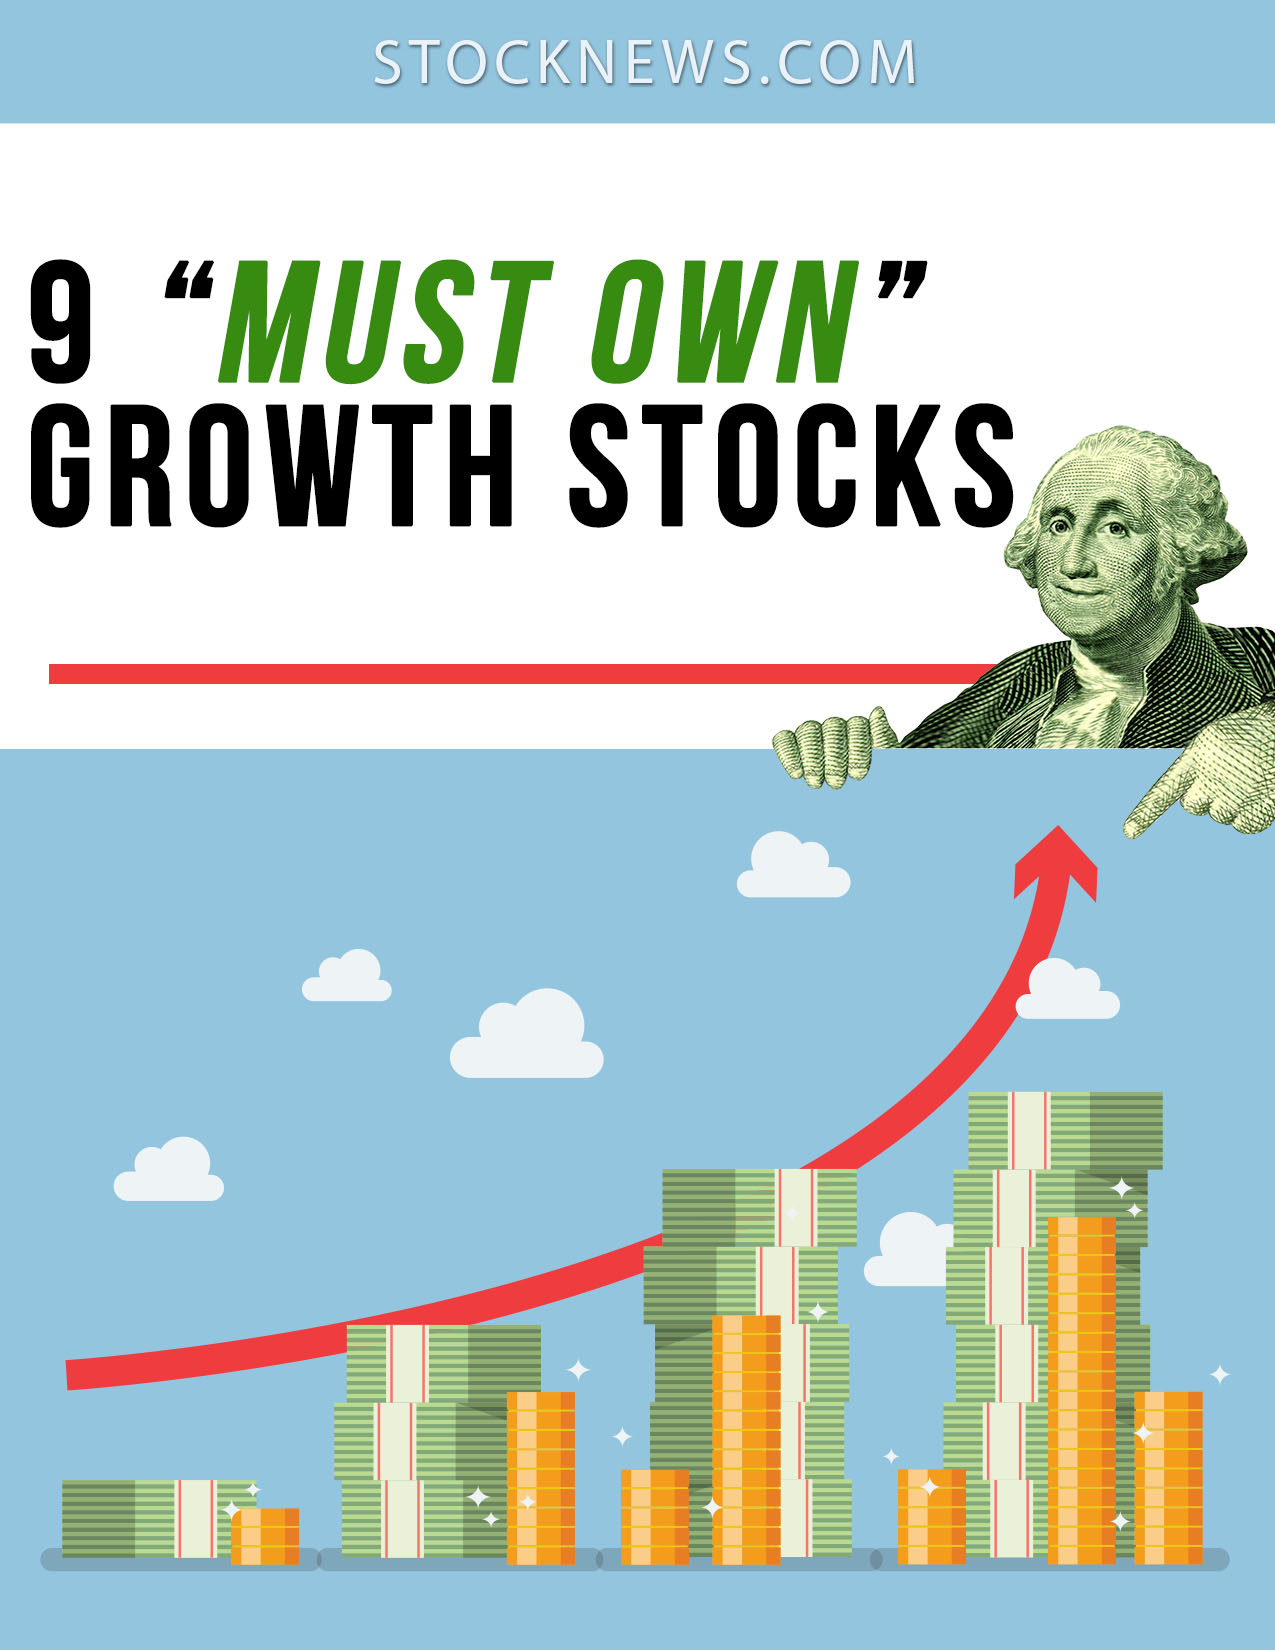 Cover of 9 Must Own Growth Stocks, with an illustration of piles of money increasing